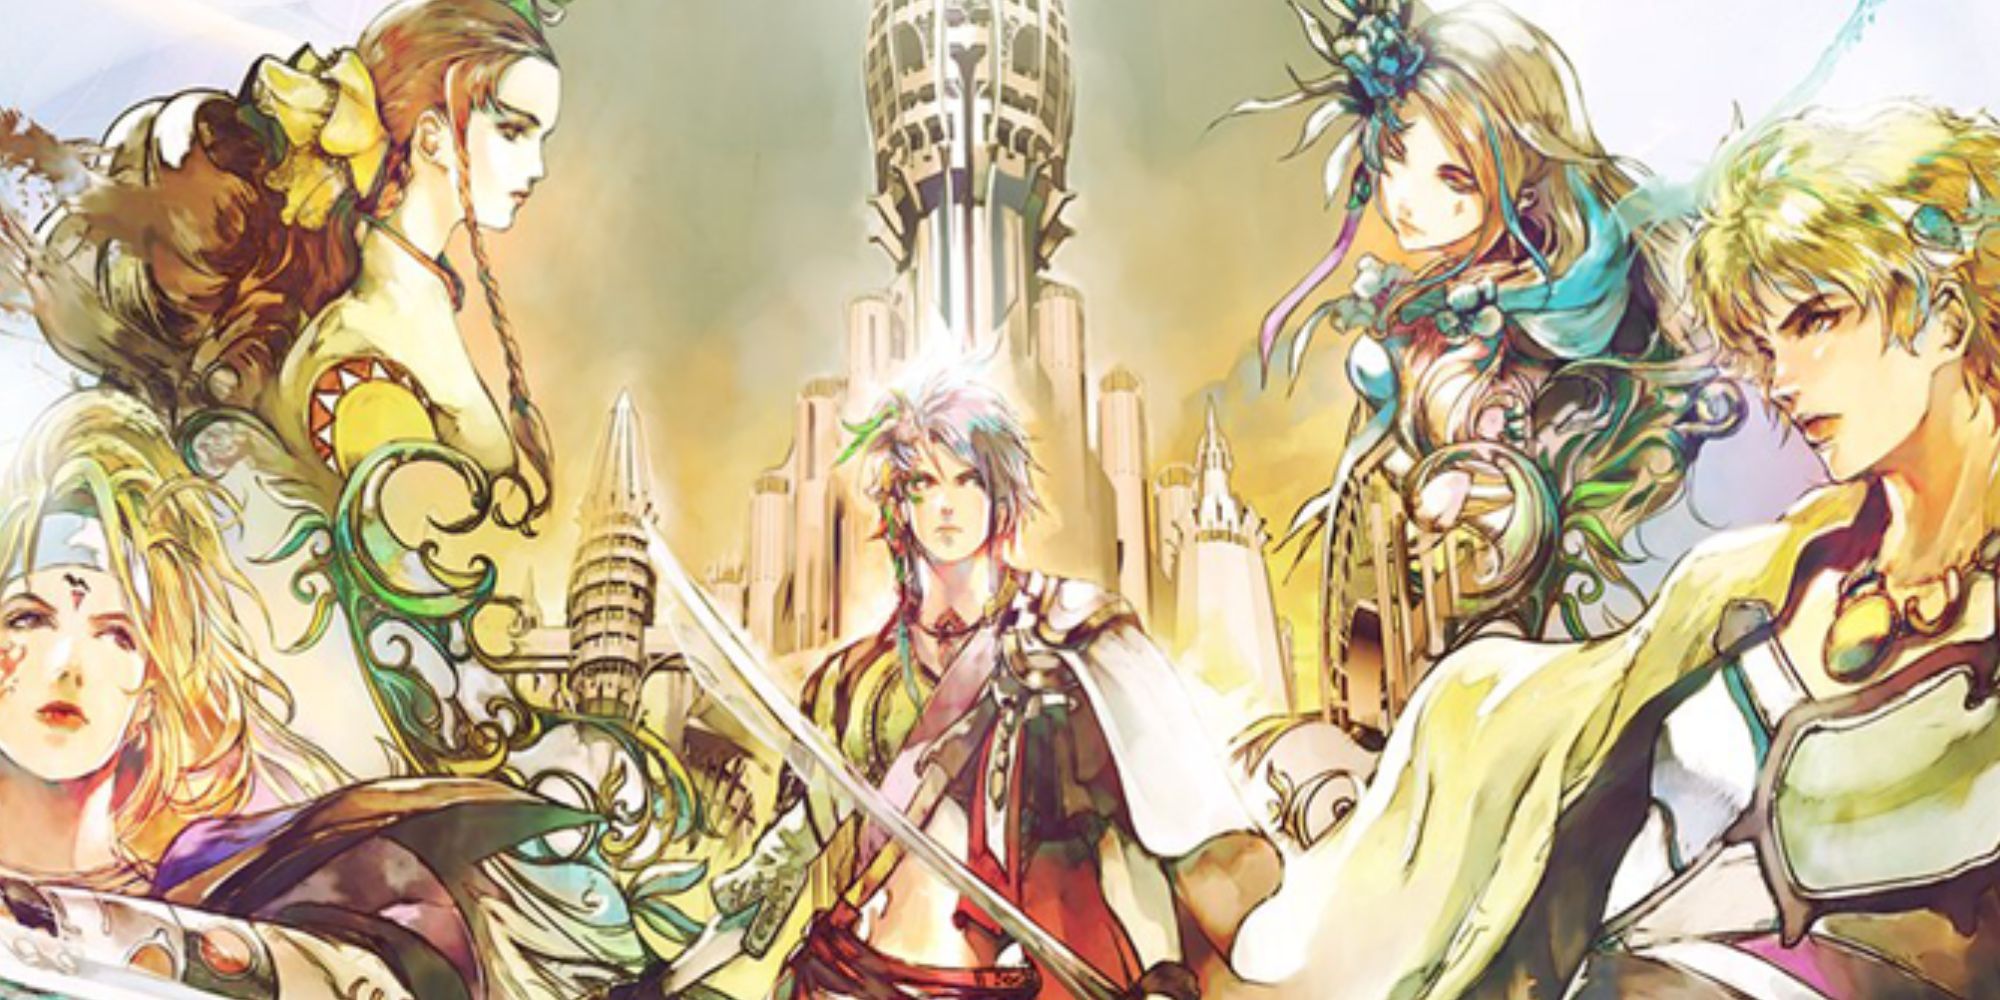 Romancing SaGa Re; UniverSe Main Cast Official Art Main Character Framed By Four Others At The Side With City In Background